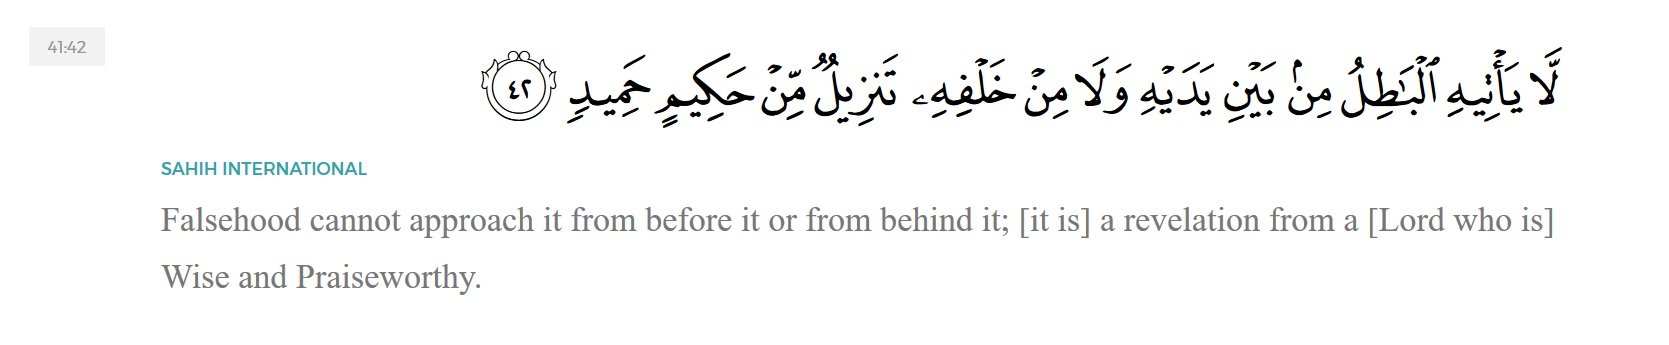 another verse about unchanged Quran